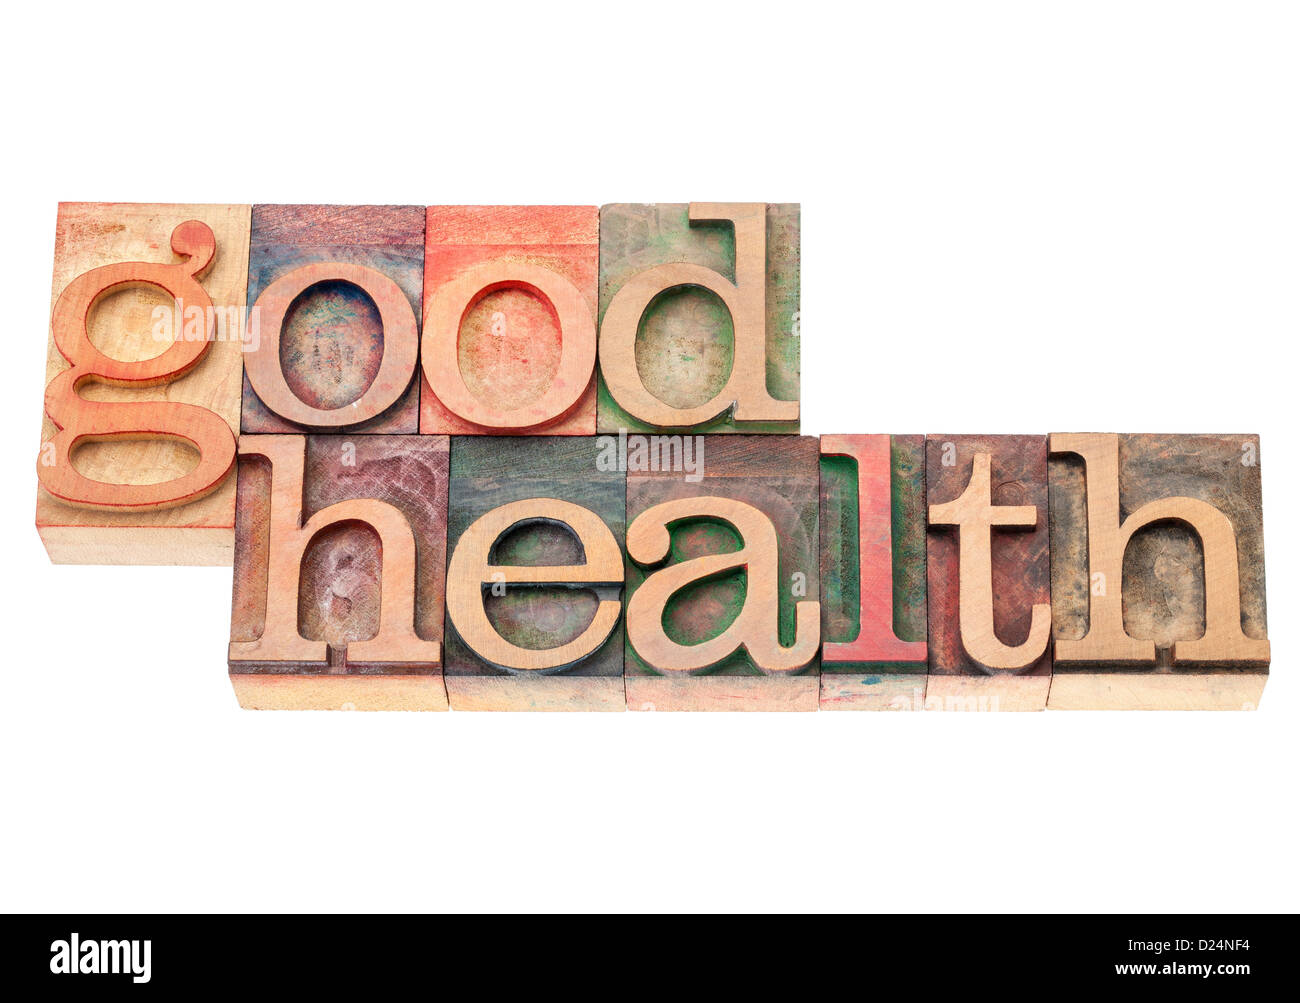 good health - wellness concept - isolated text in vintage letterpress wood type printing blocks Stock Photo